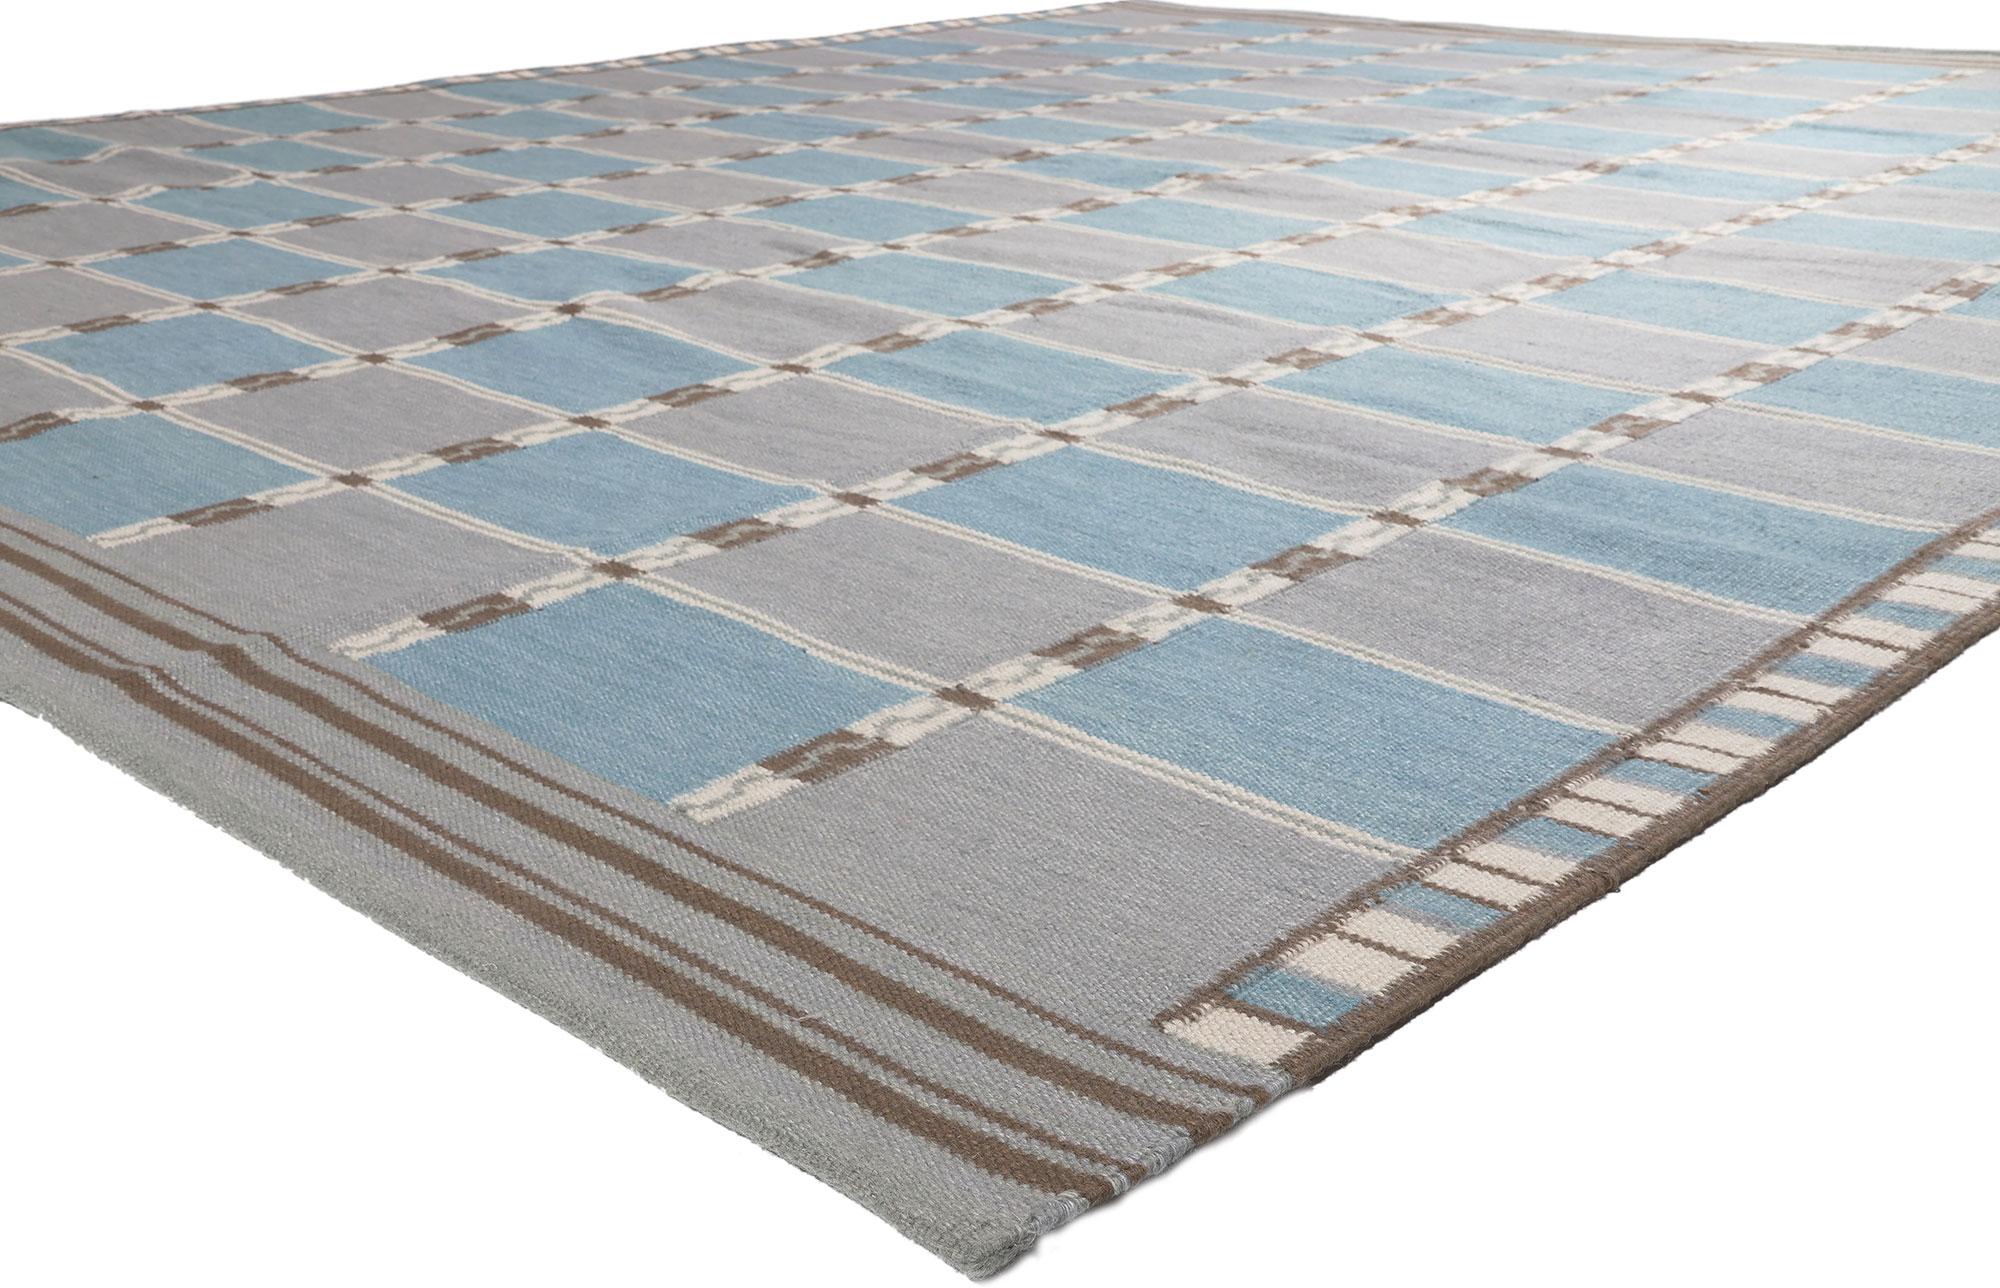 30938 New Swedish Inspired Kilim Rug, 12'04 x 14'10.
Displaying simplicity with incredible detail and texture, this handwoven wool Swedish inspired Kilim rug provides a feeling of cozy contentment without the clutter. The eye-catching checked design